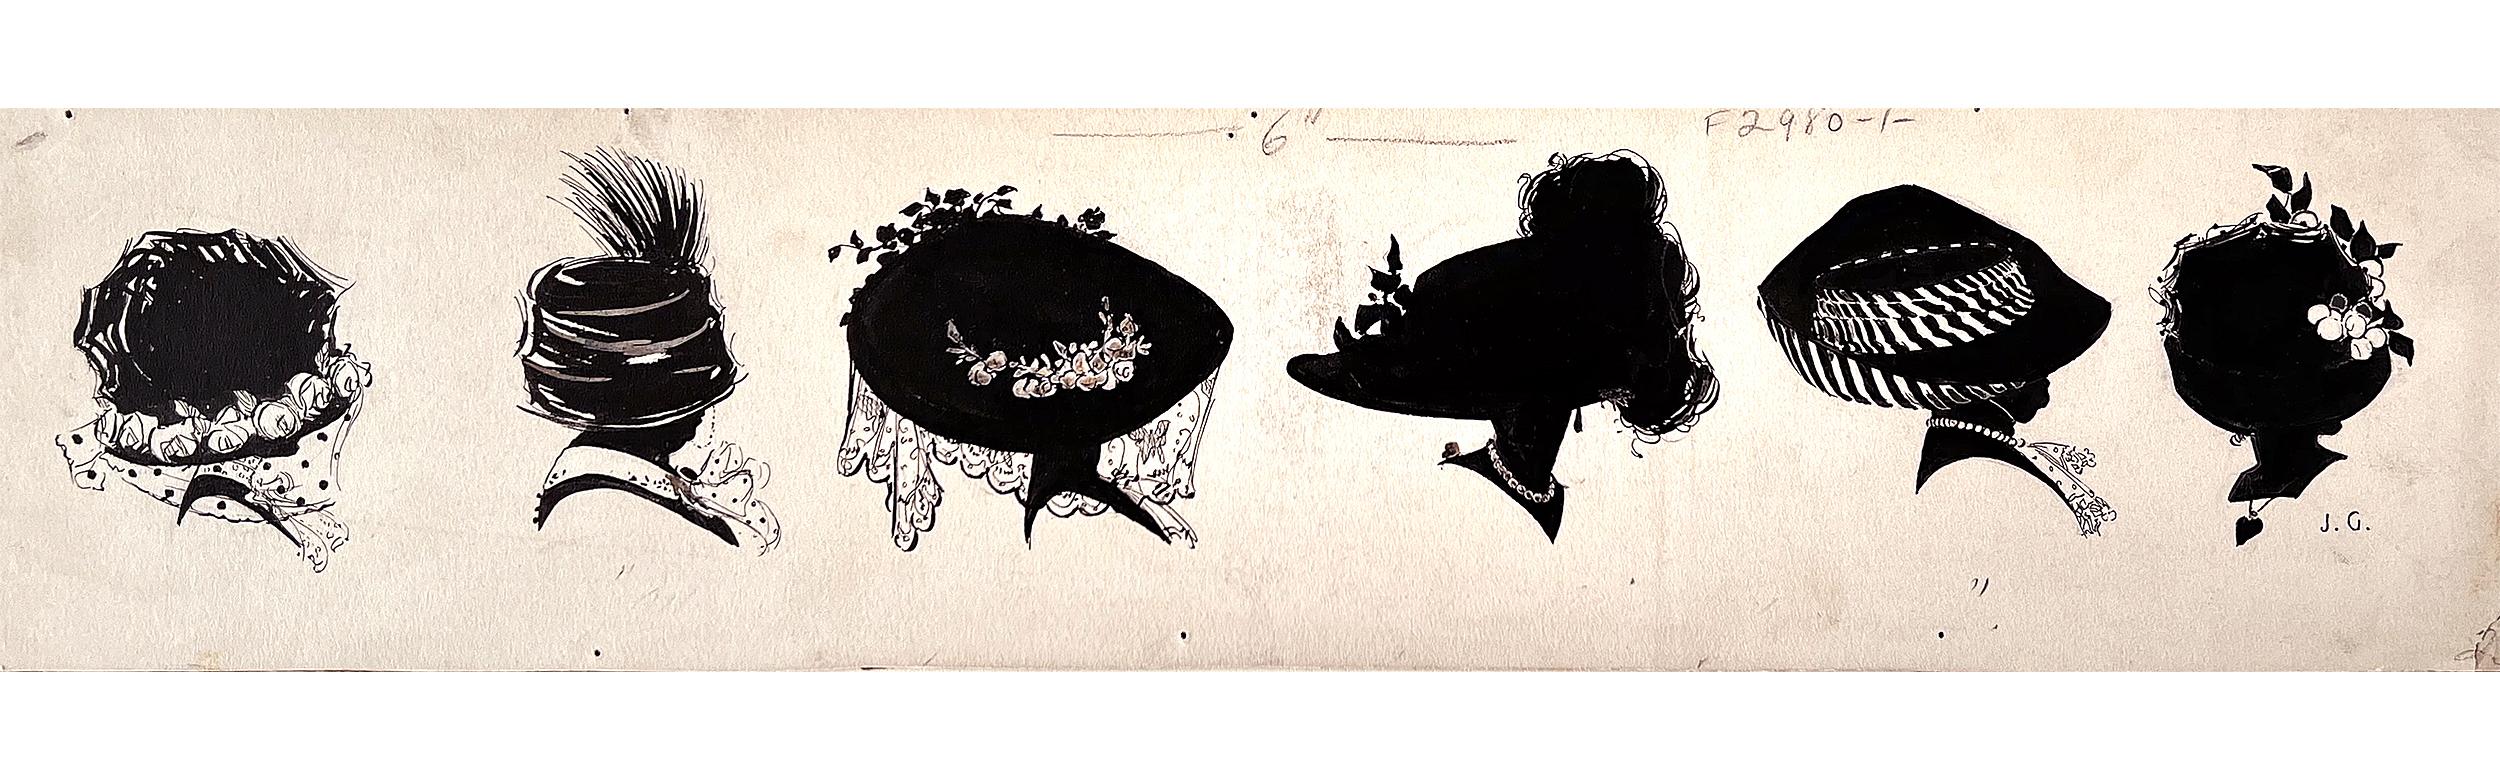 Abstract Silhouette Hat Portraits  - Female Illustrator of Golden Age